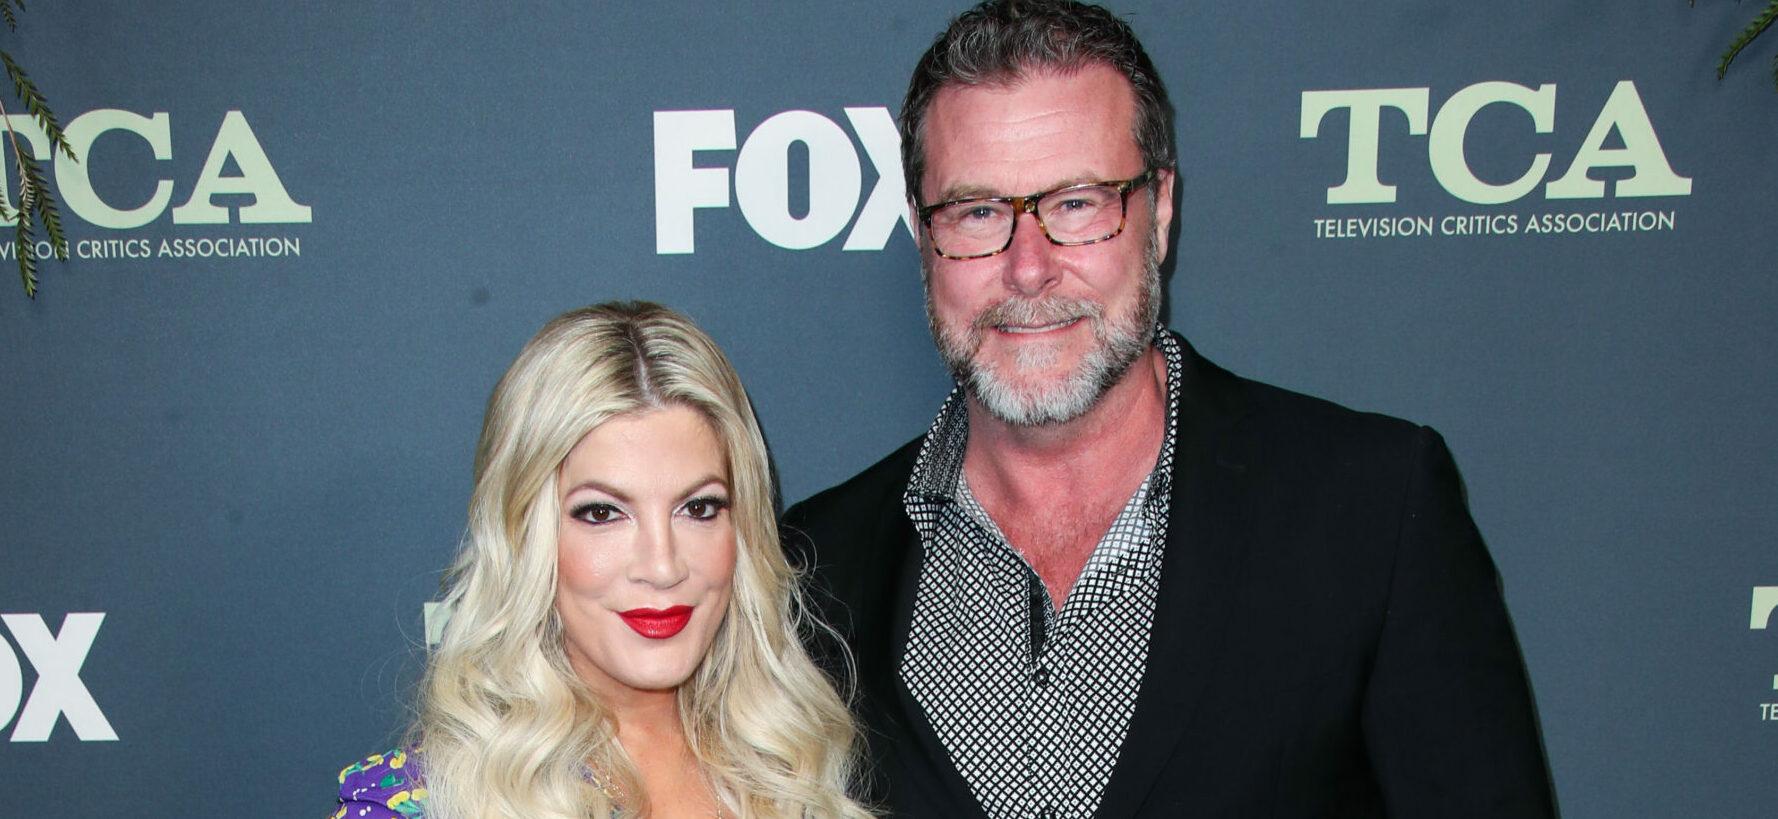 Tori Spelling Hospitalized And Hooked Up To IV After RV Stay With Her 5 Children